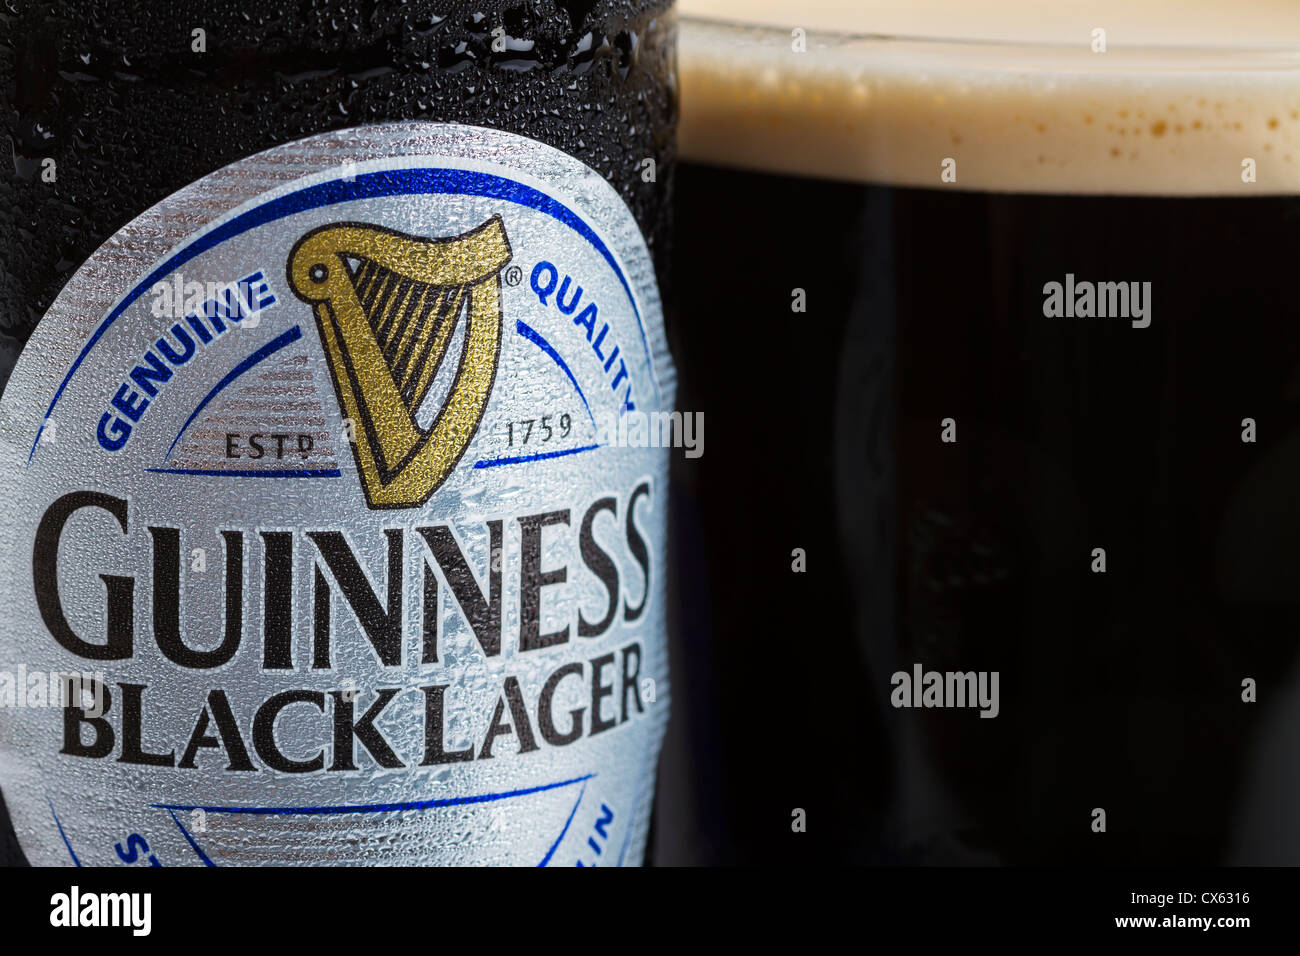 Dublin, Ireland - September 12, 2012. This is a studio product shot of a can of Guinness black lager next to a glass of freshly Stock Photo